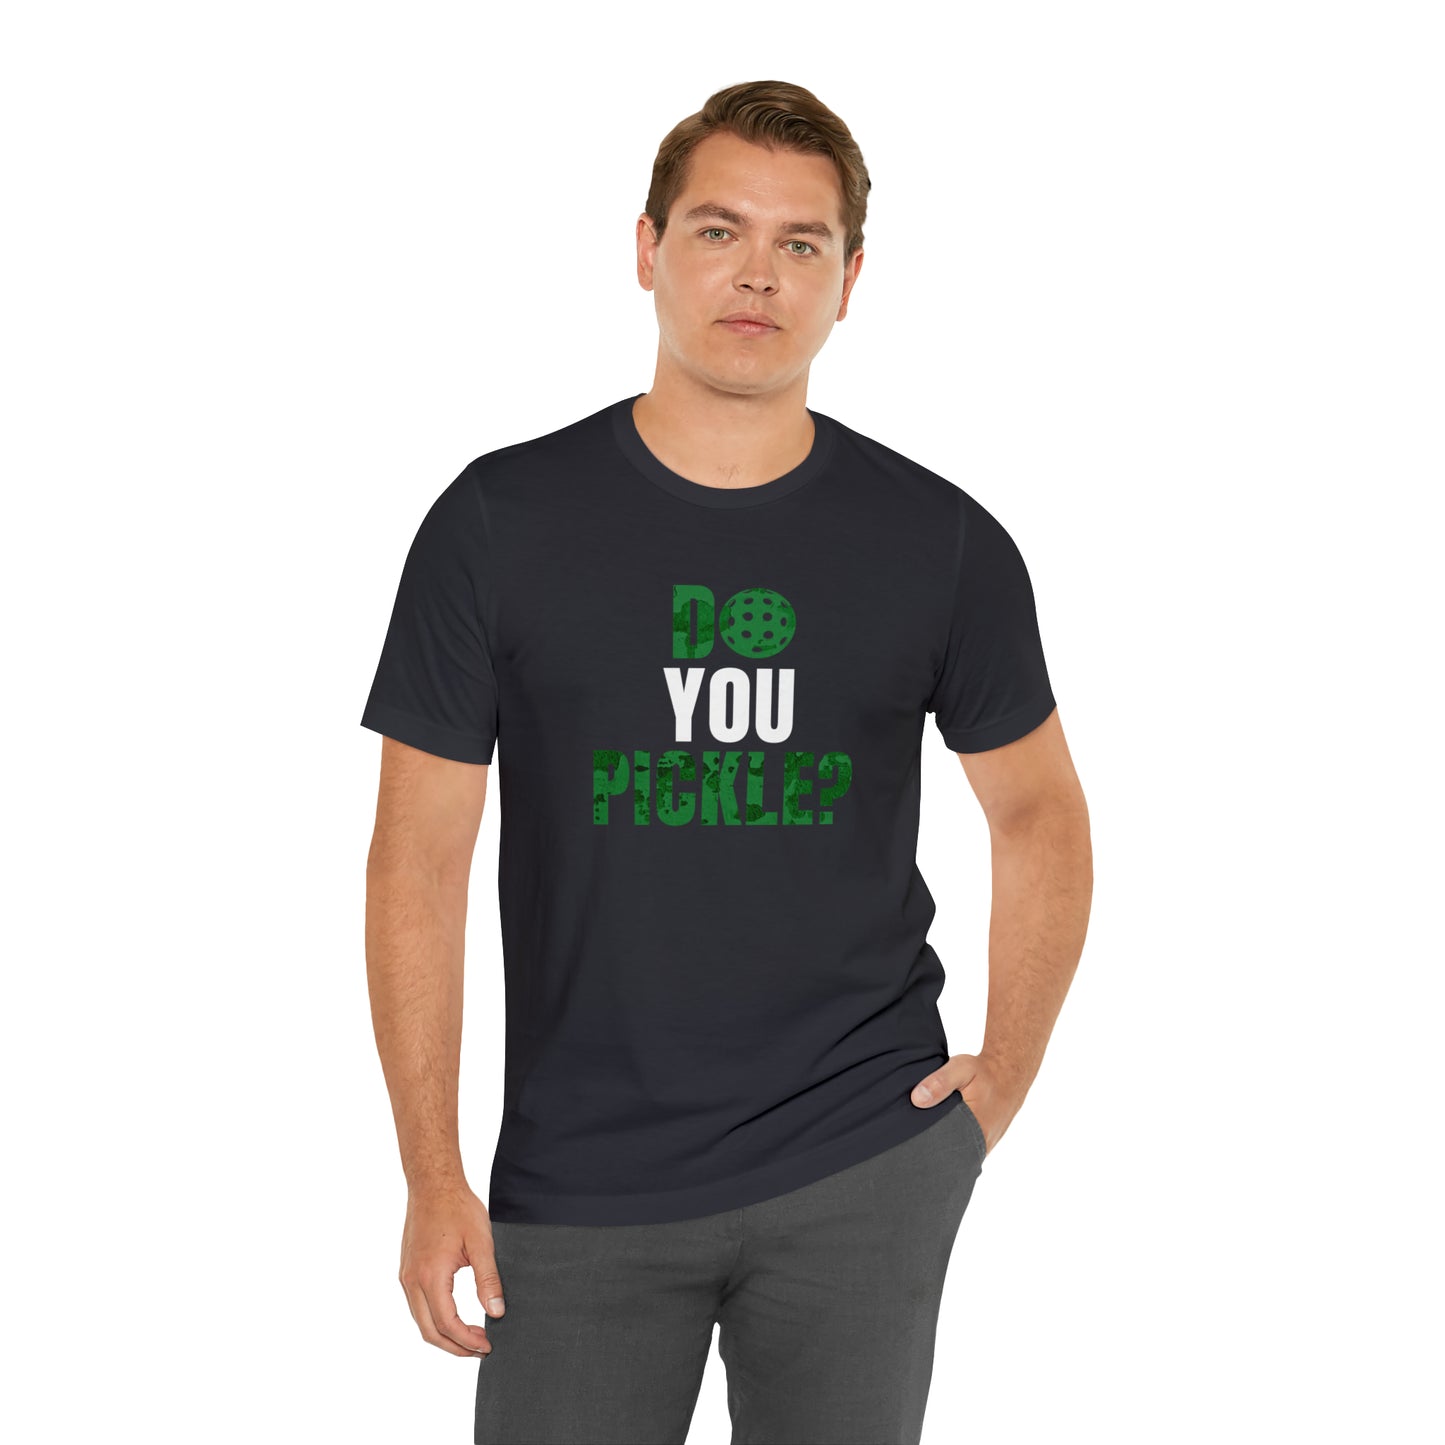 Do You Pickle? - Humorous Cotton T-Shirt for Pickleball Fans